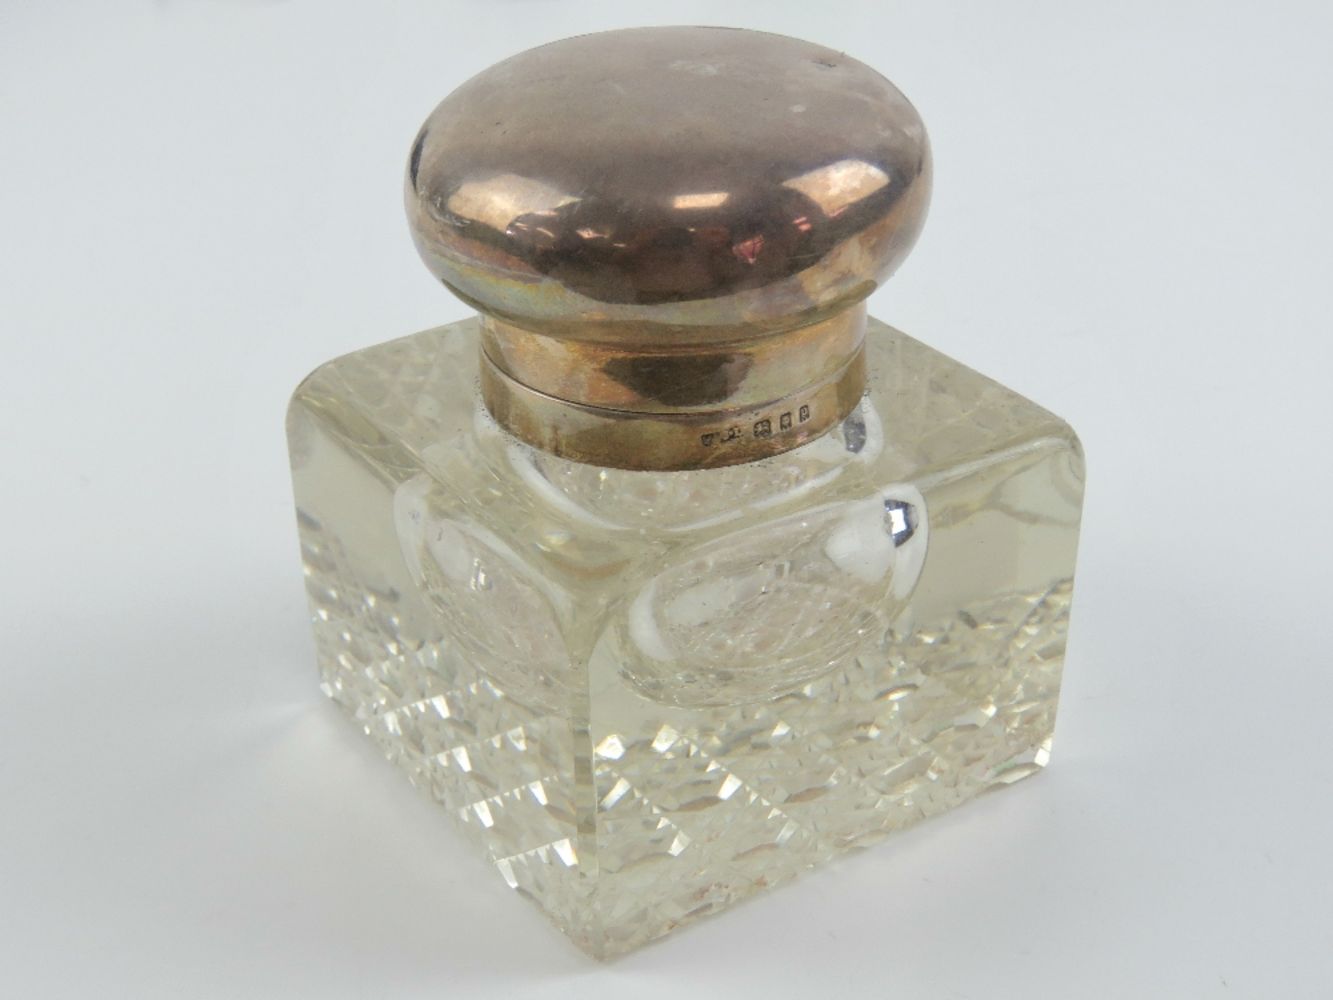 Online Only Auction of Jewellery, Antiques & Furniture